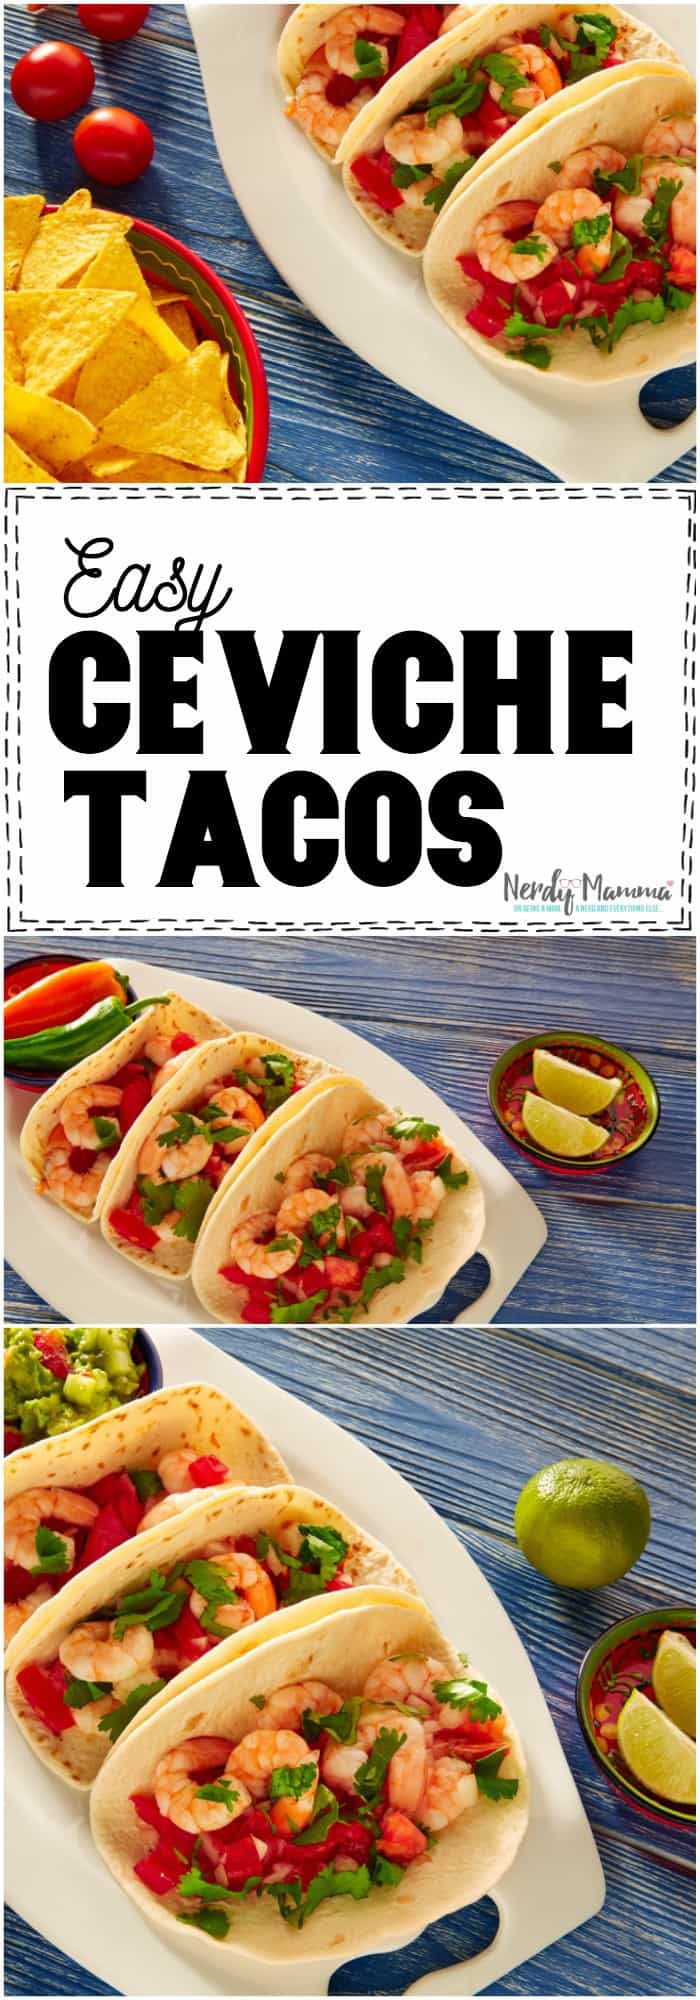 Oh, I had no idea you could cook shrimp with lime juice! This recipe for ceviche tacos is amazing! #taco #texmex #mexican #tasty #recipe #food #foodporn #shirmp #shrimptaco #ceviche